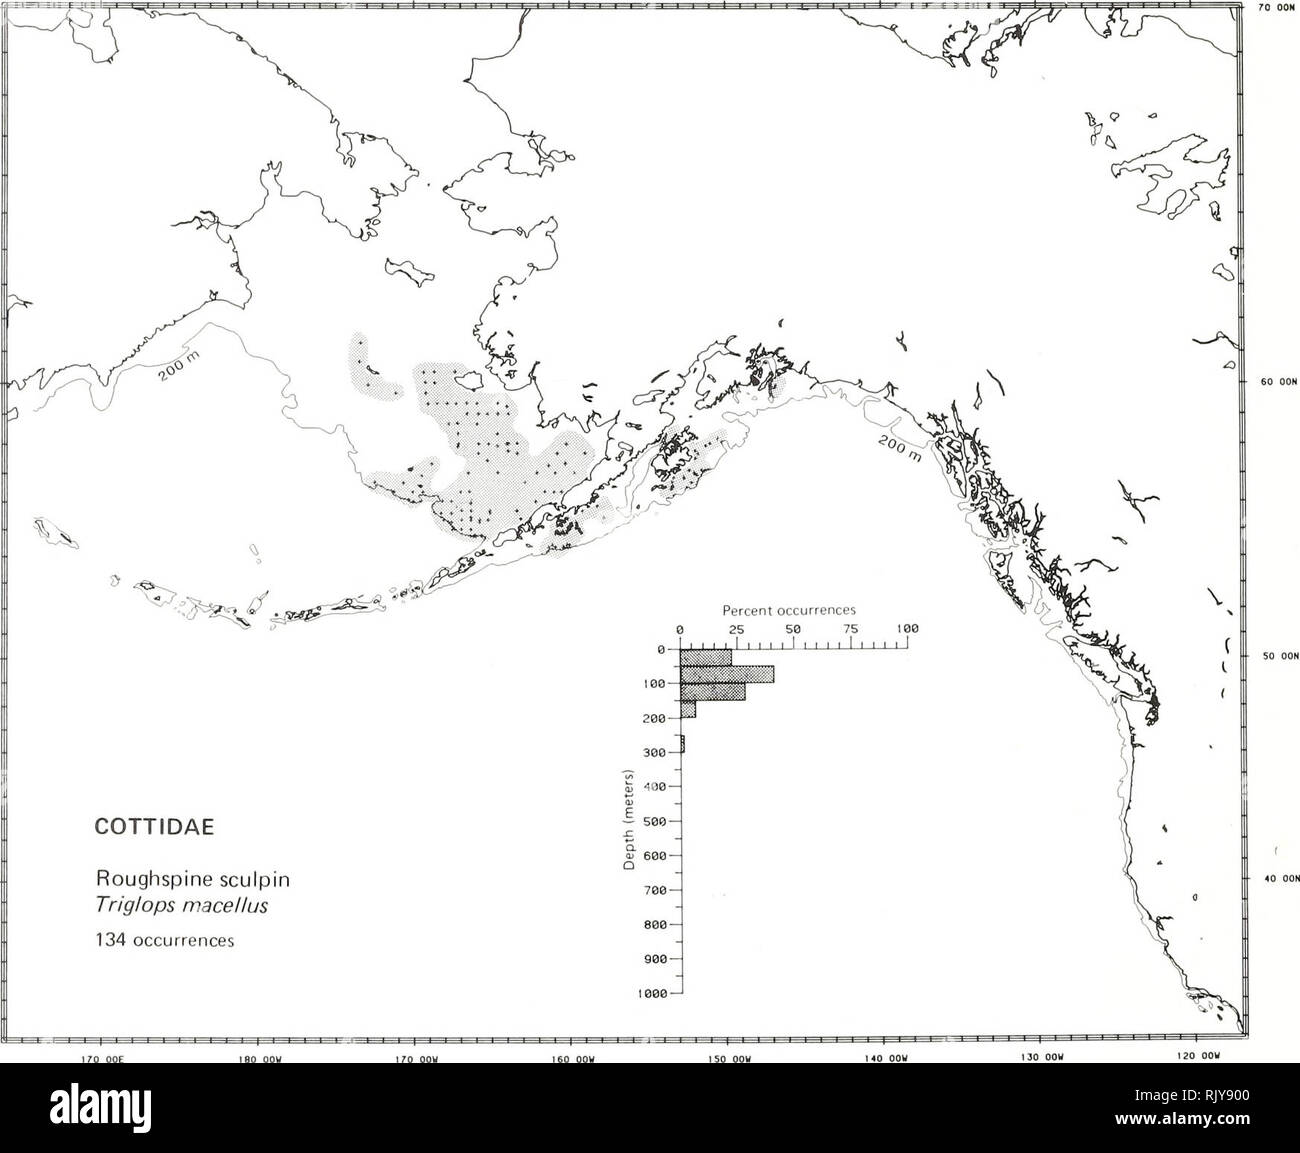 . Atlas and zoogeography of common fishes in the Bering Sea and Northeastern Pacific / M. James Allen, Gary B. Smith. Fishes Bering Sea Geographical distribution.. ROUGHSPINE SCULPIN, Triglops macellus (Bean 1883) Cottidae: Sculpins Literature Reported from the Bering Sea, west in the Aleutian Islands to Amchitka Island, and southeast to Washington (Simenstad et al. 1977; Eschmeyer and Herald 1983), at depths of 18 to 245 m (Fedorov 1973a; Eschmeyer and Herald 1983). Survey data Found from northwest of Saint Matthew Island and north of Nunivak Island, southeast in the eastern Bering Sea to Uni Stock Photo